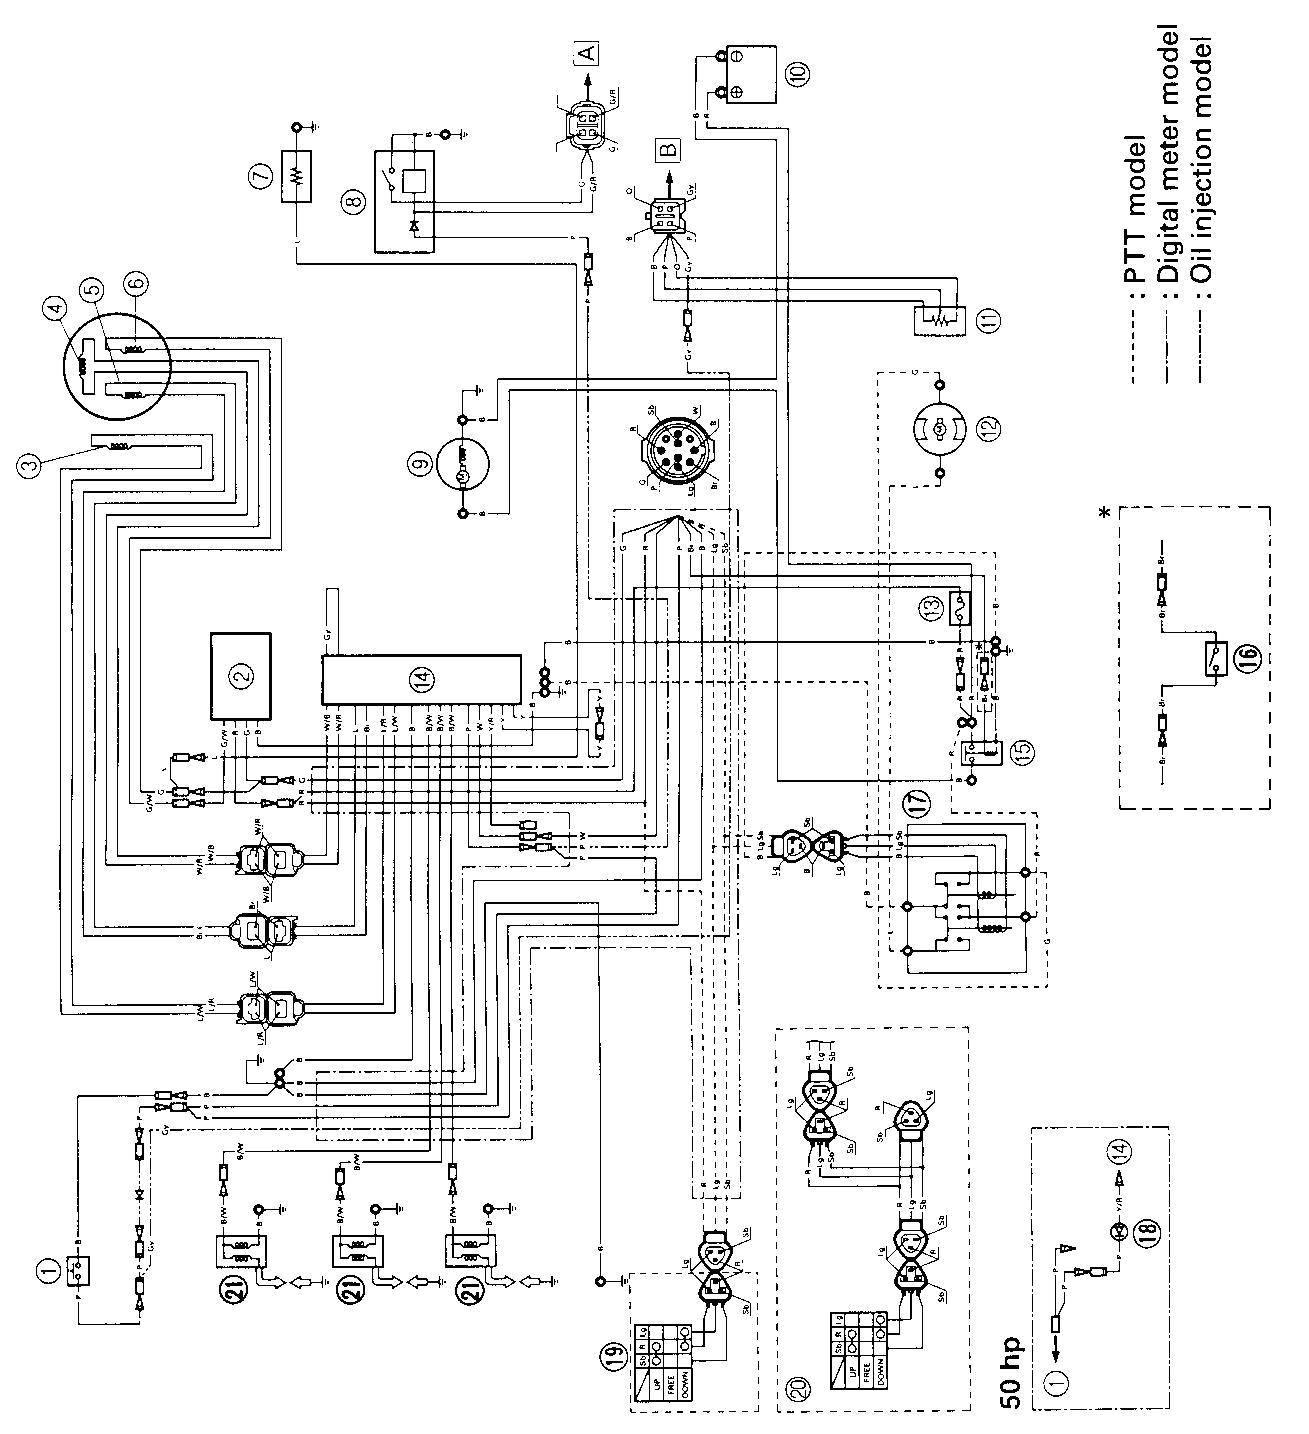 yamaha 40 hp 2 stroke outboard wiring diagram free picture wiring 2 stroke yamaha outboard wiring diagram